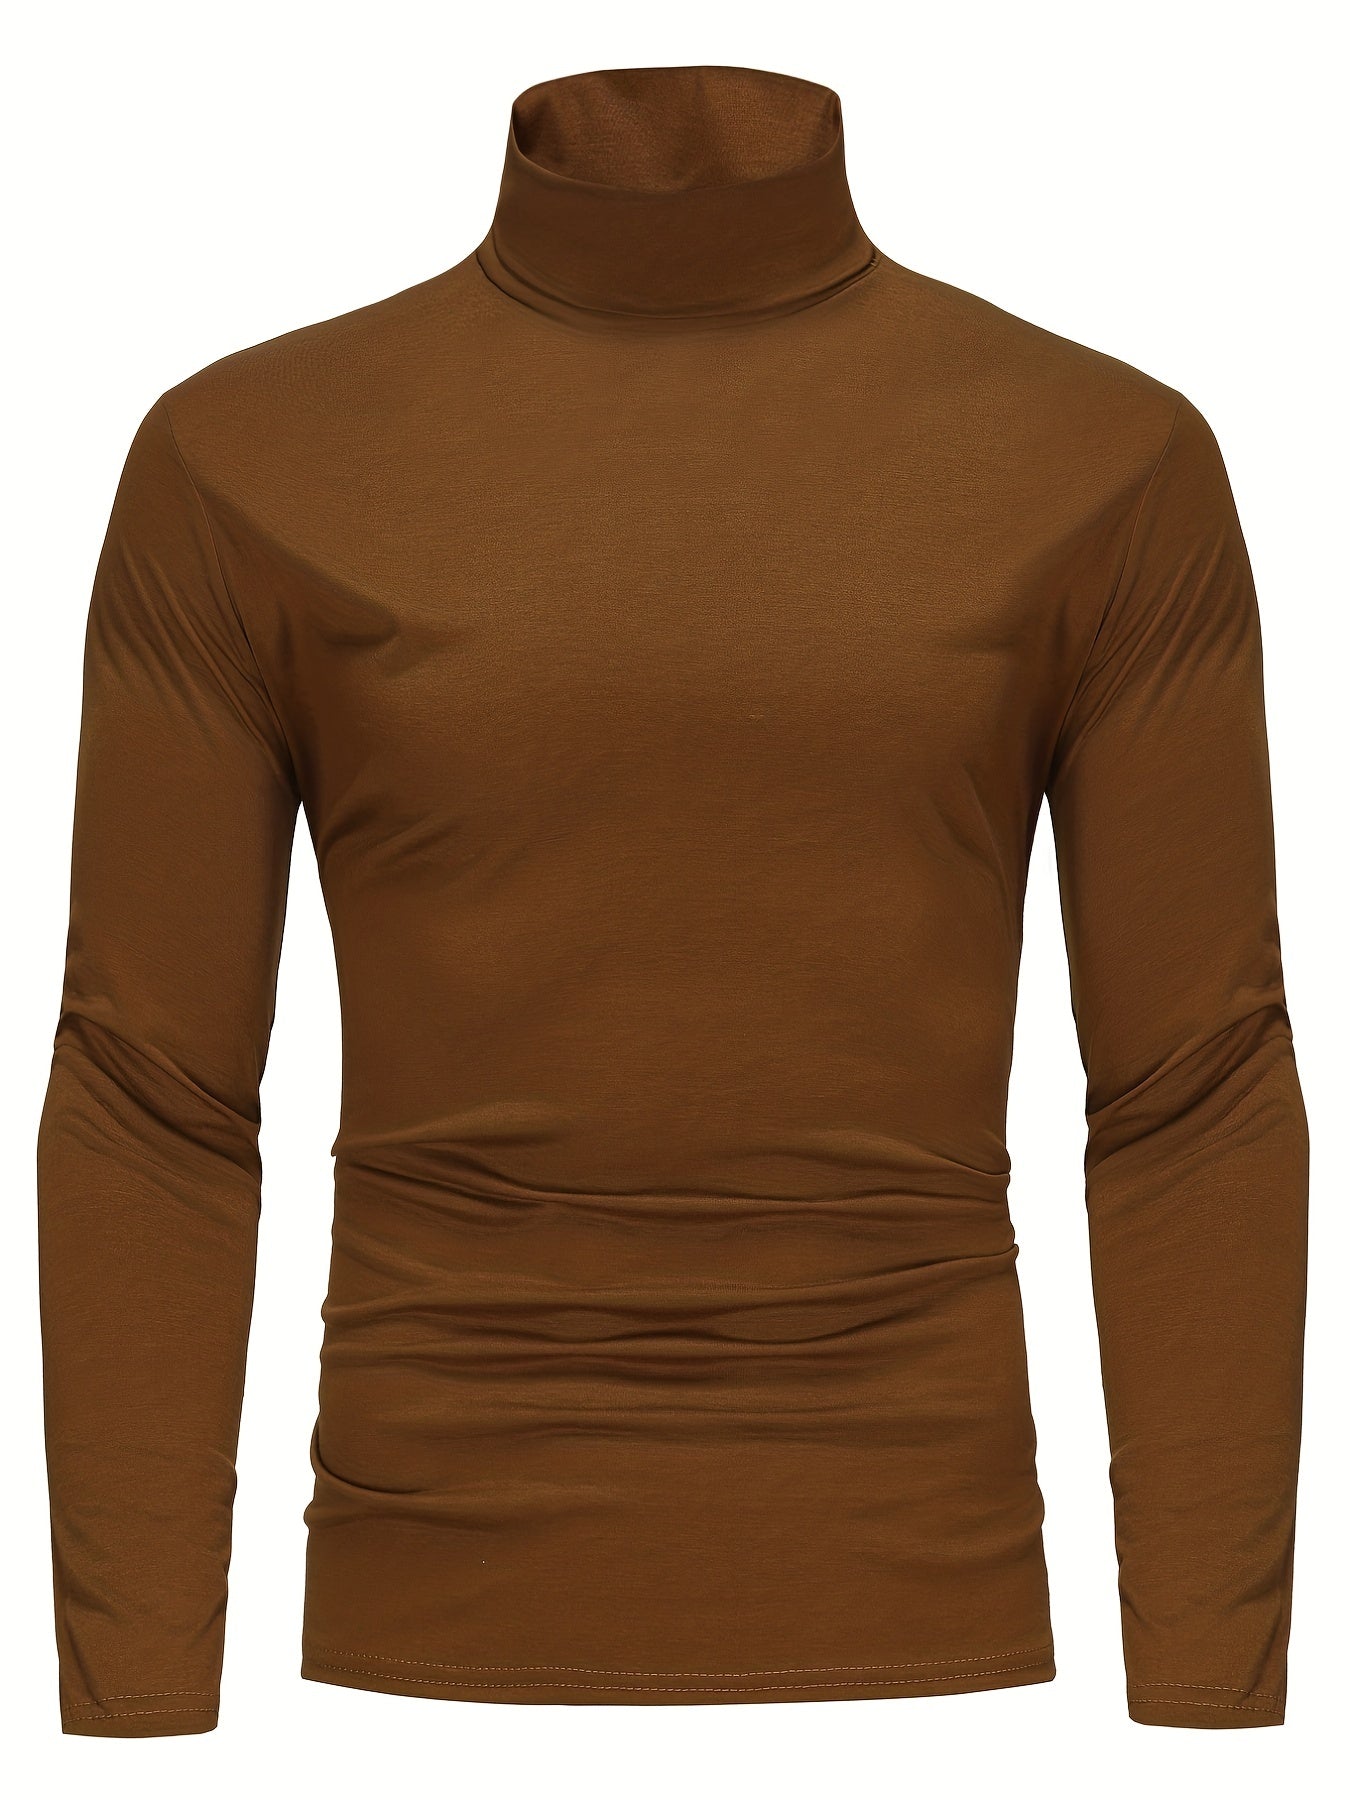 One Size Smaller,  Close-Fitting And Thin, Men's Casual Long Sleeve Turtleneck Base Layer Shirt Best Sellers